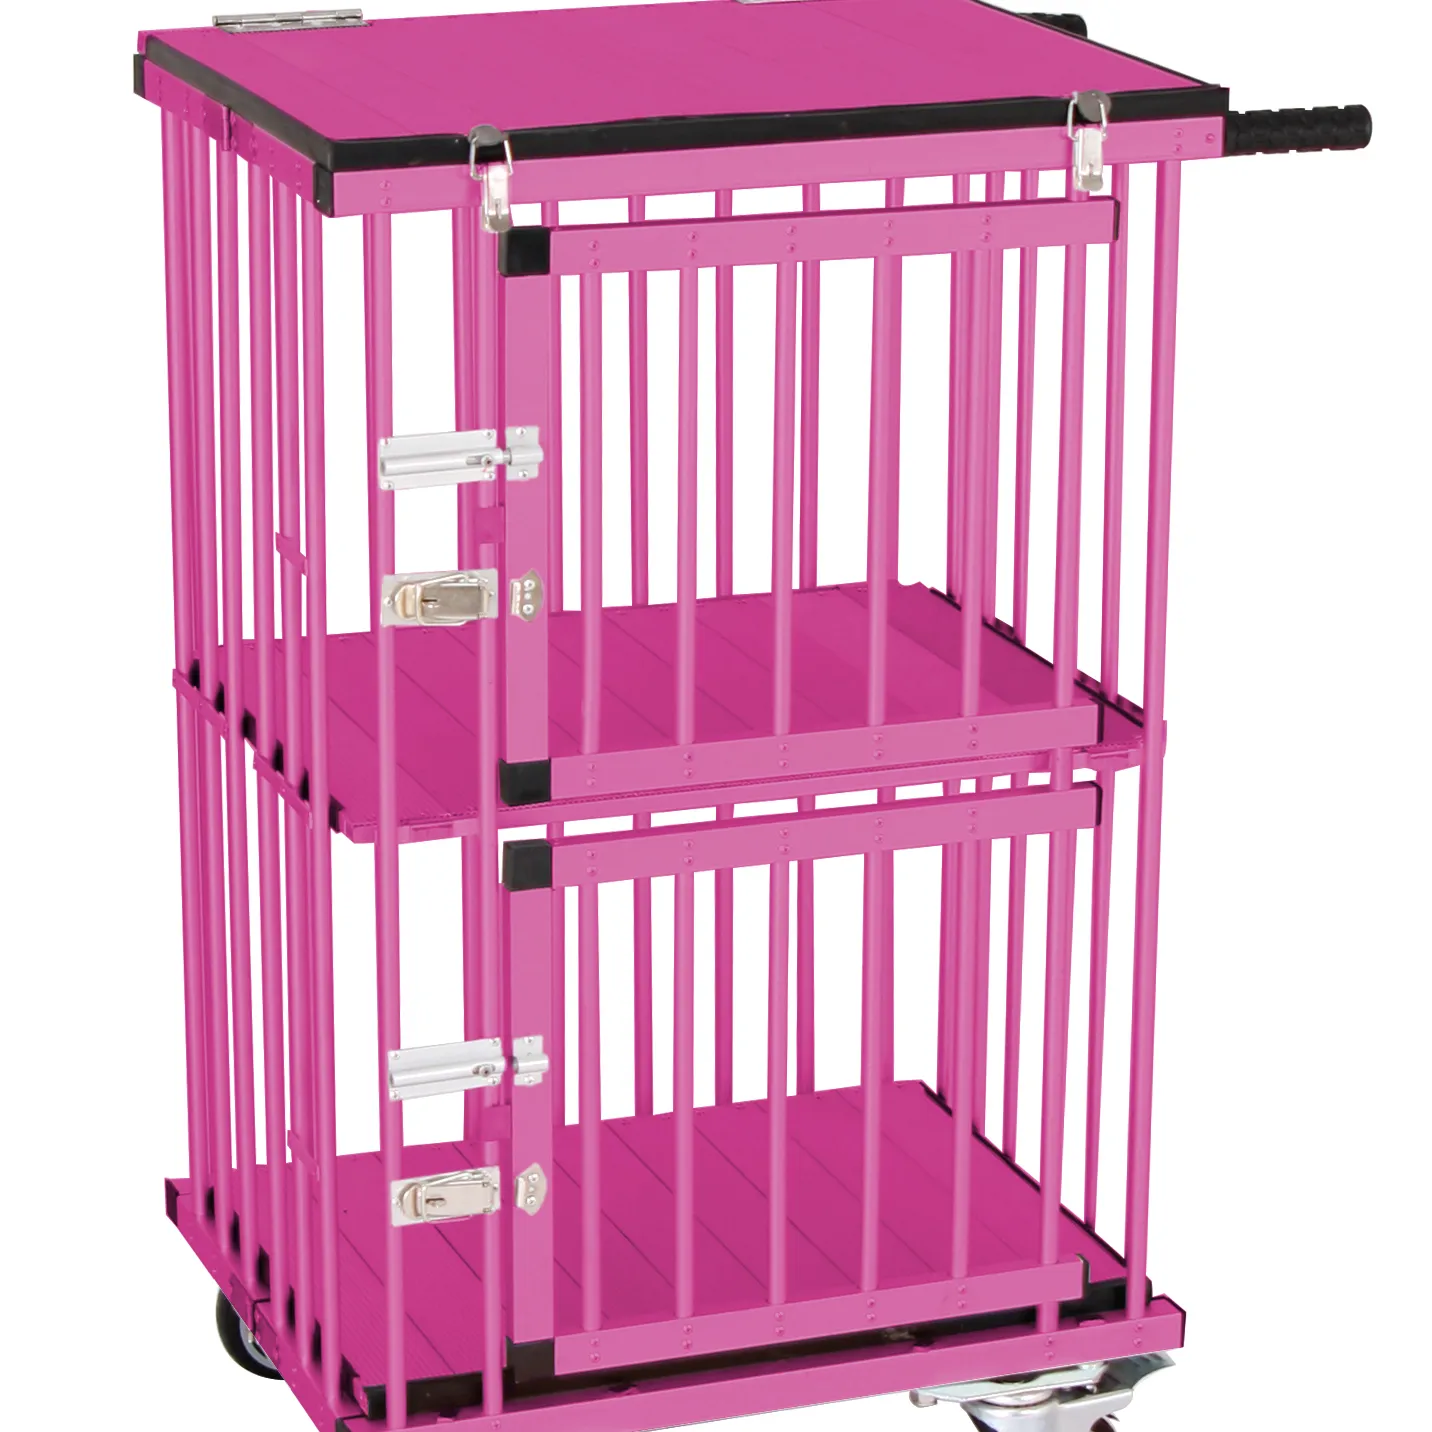 HF Wholesale Aluminum Dog Trolley pet carrier with wheels portable pet carrier pet cages & houses